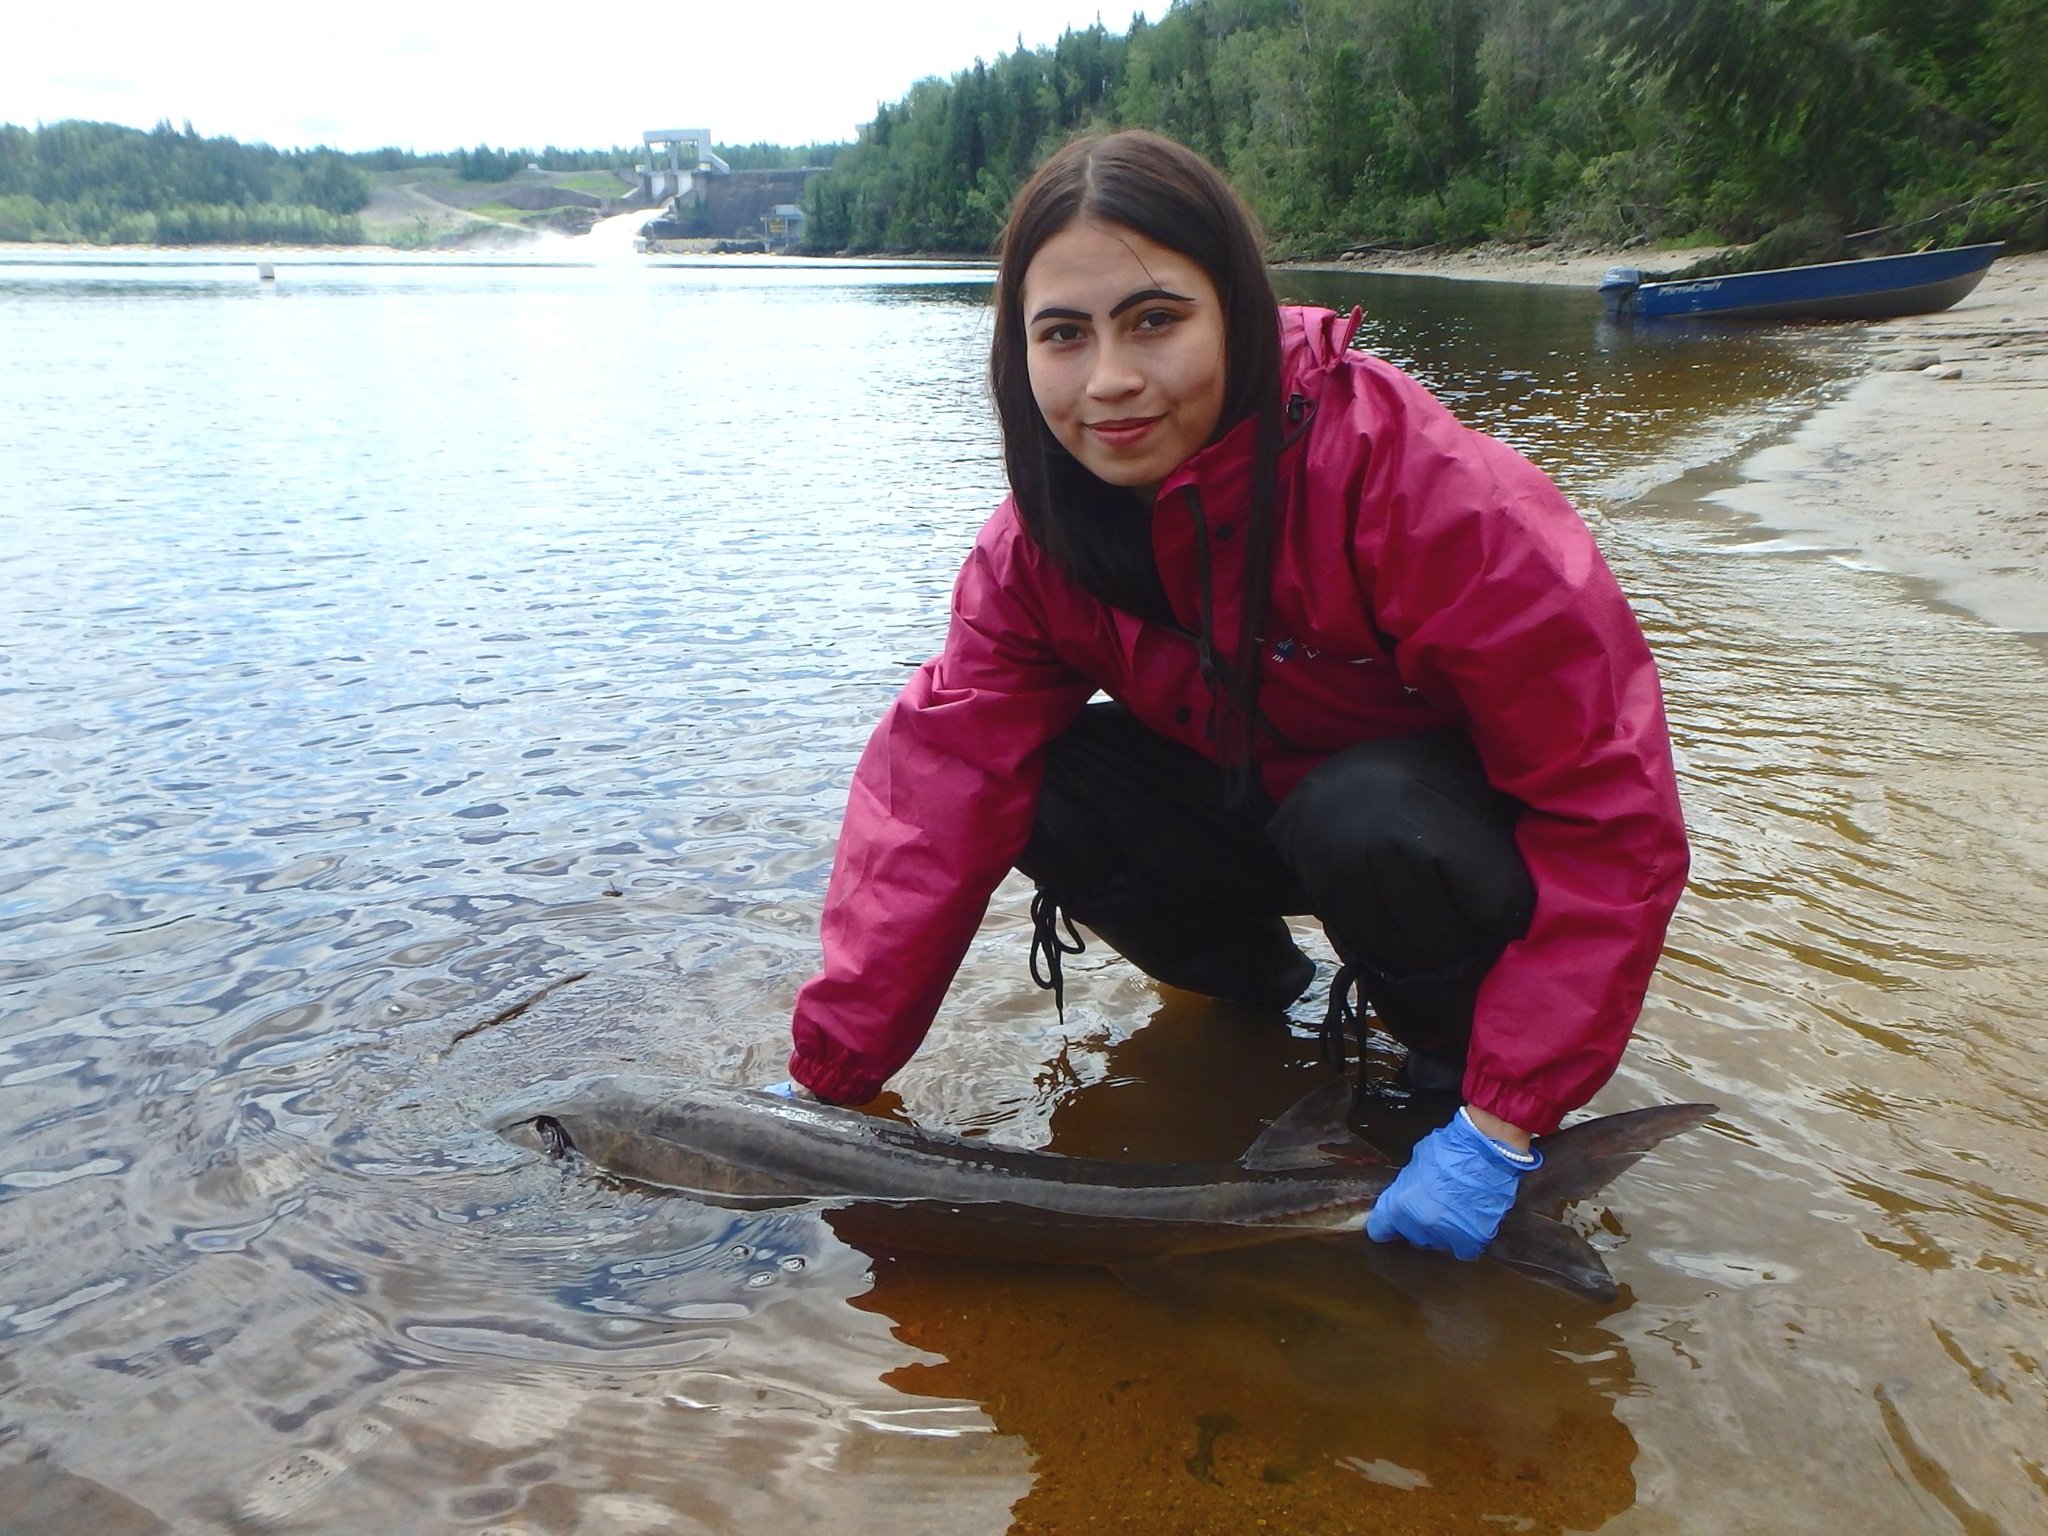 Ocean Phillips (Moose Cree First Nation youth participant) releases a lake sturgeon on the Mattagami River.